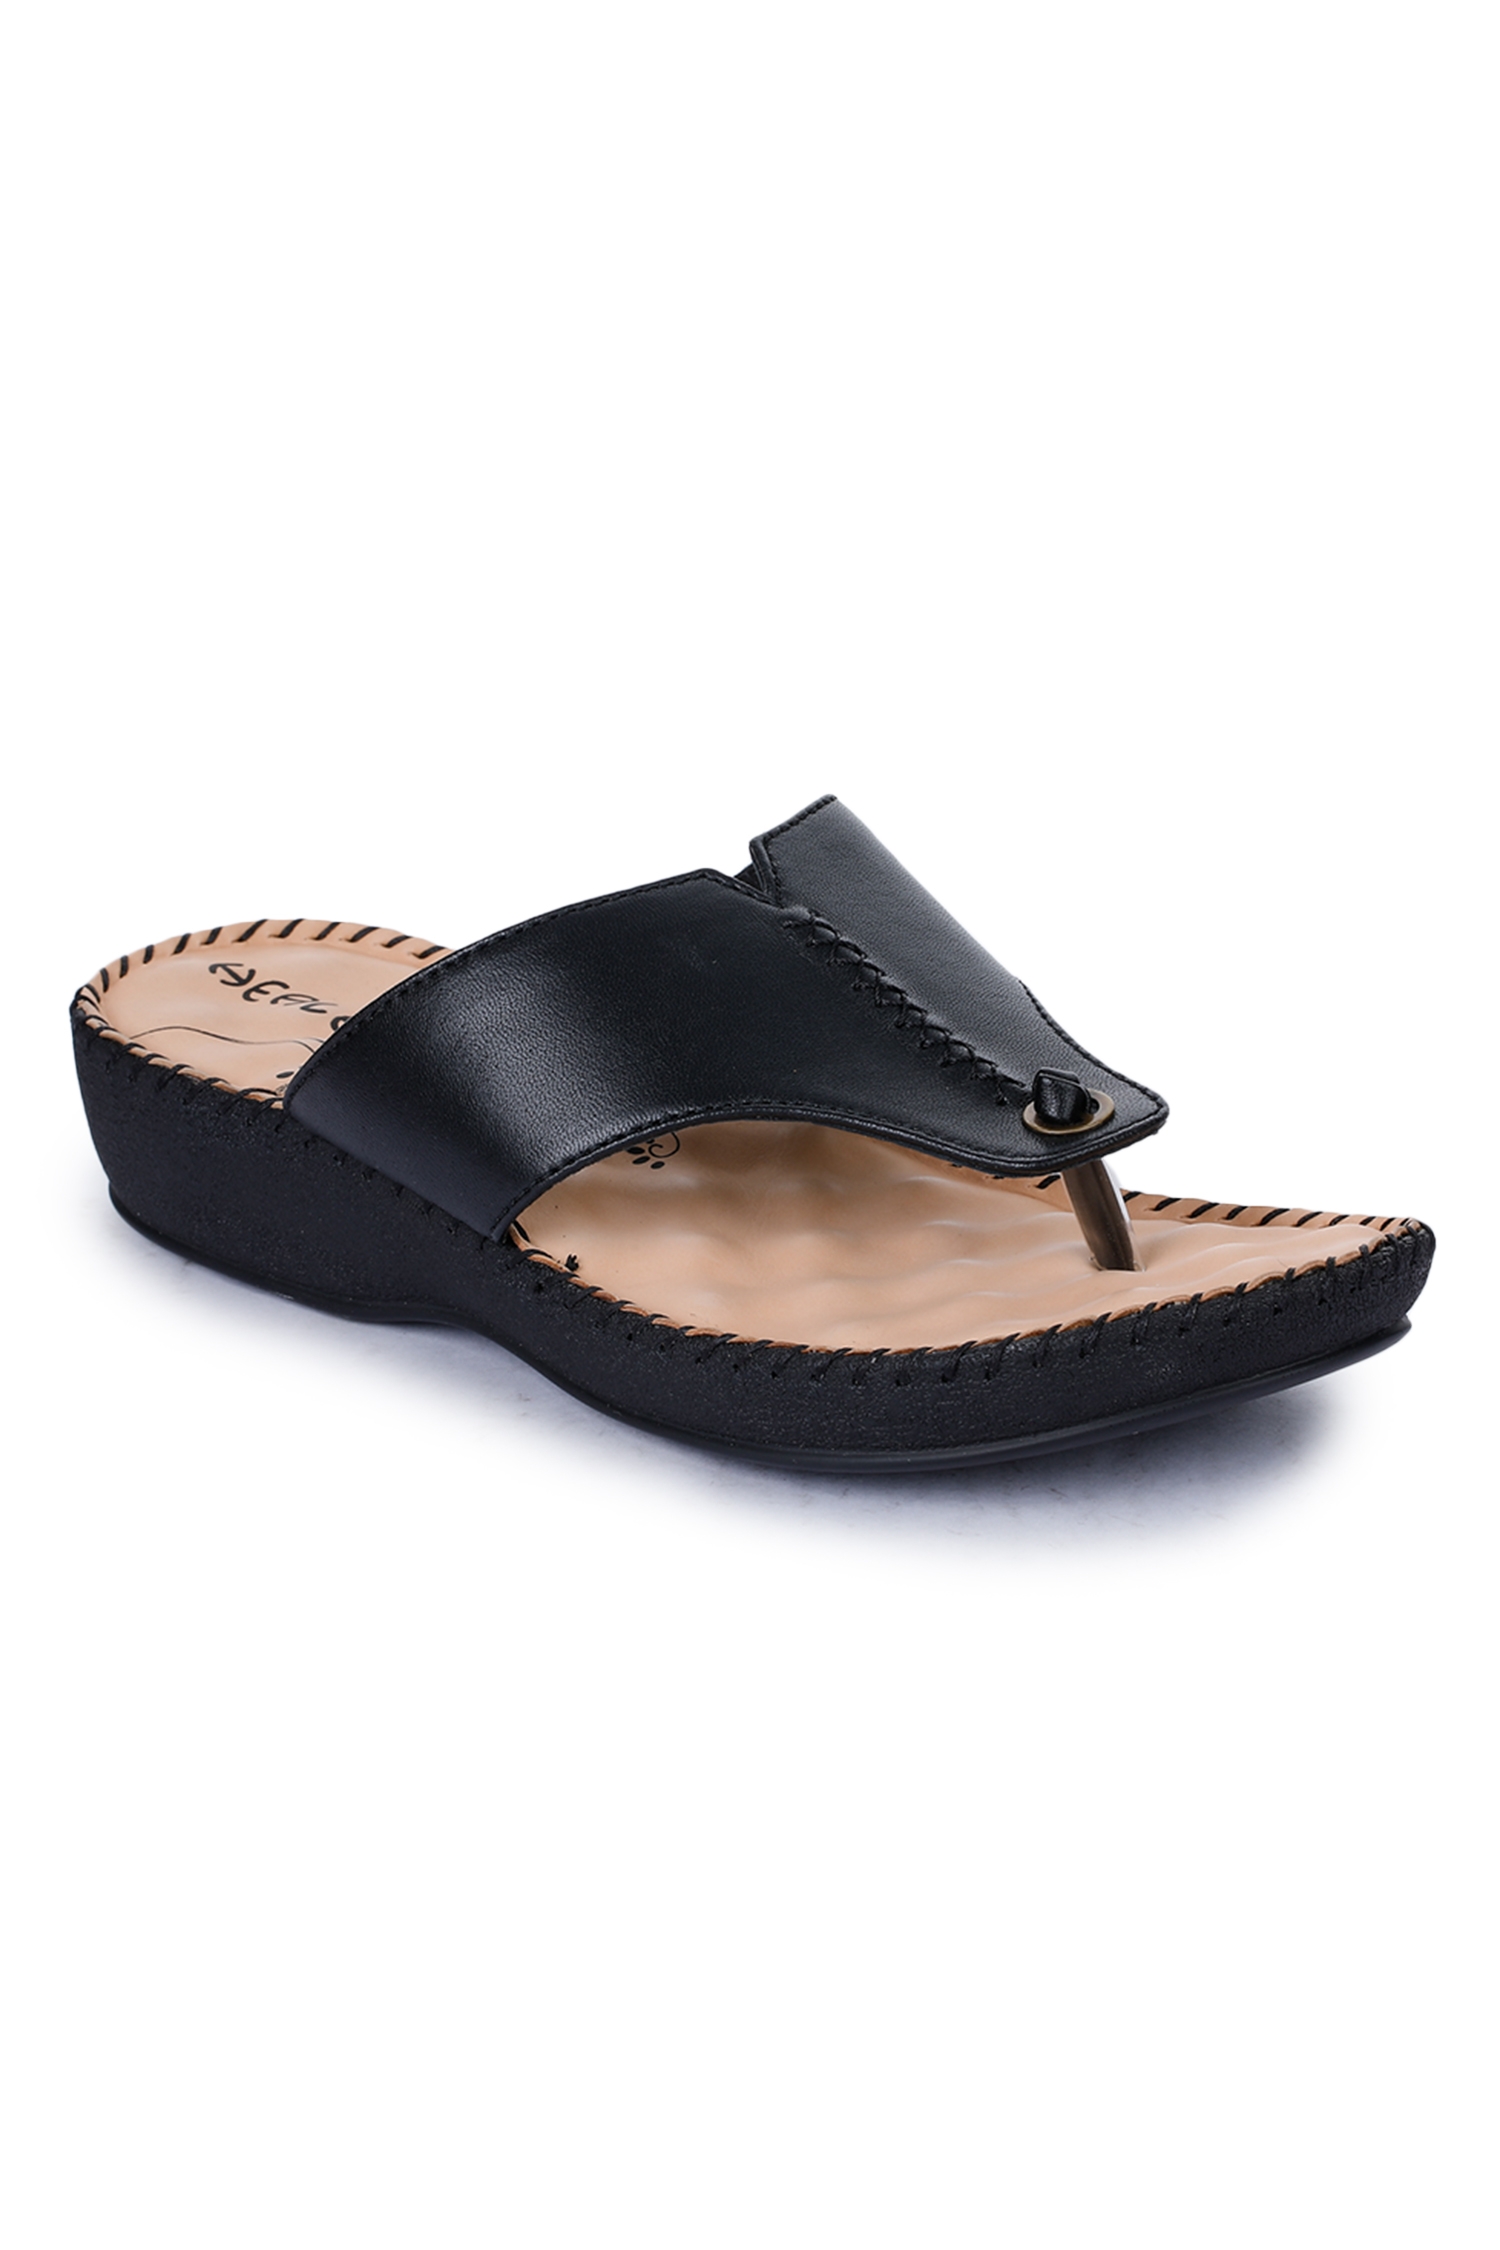 Liberty | Liberty HEALERS Slippers DR-519_BLACK For - Women